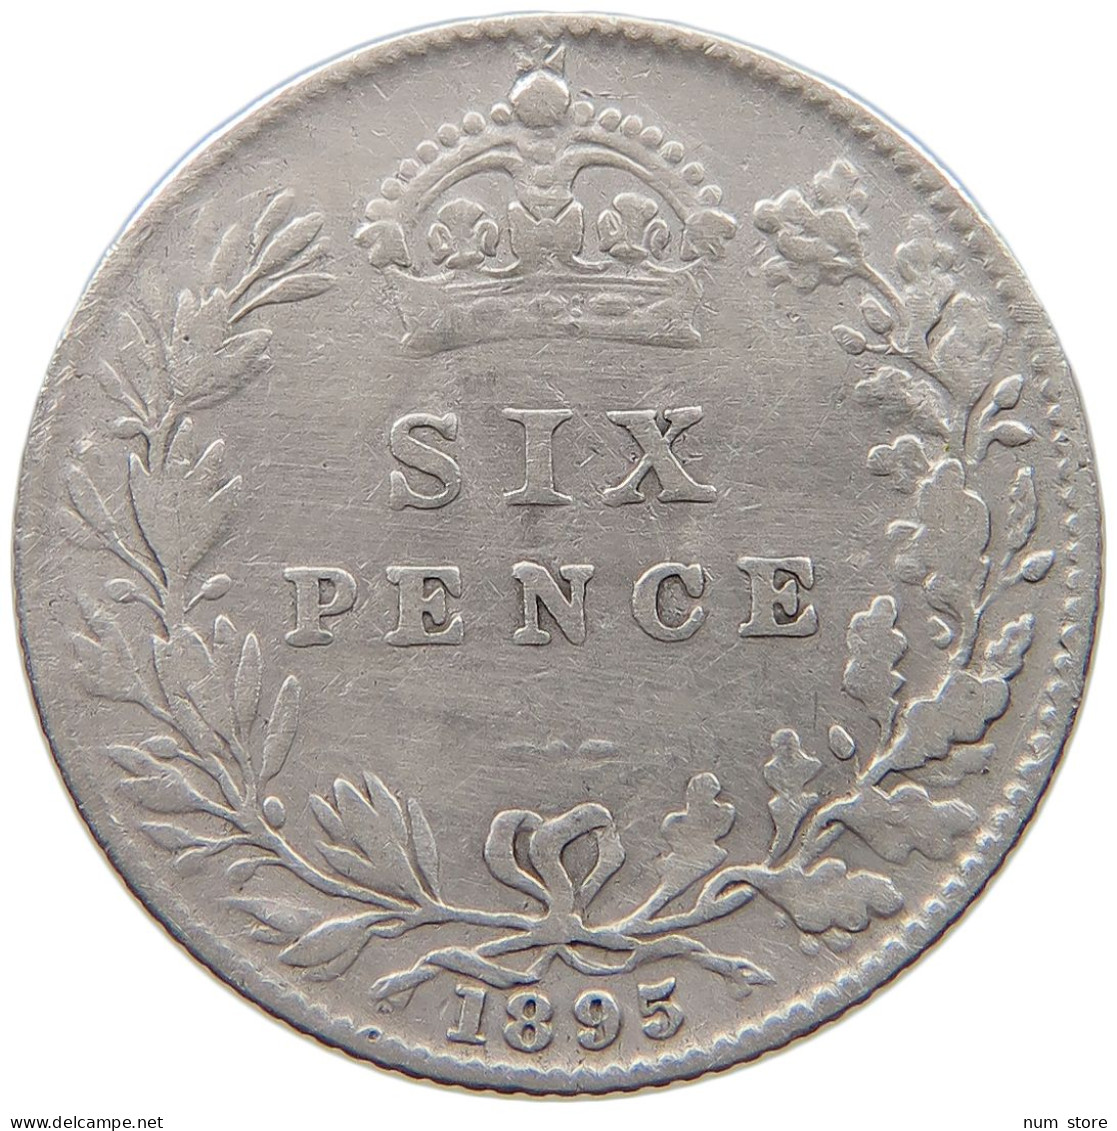 GREAT BRITAIN SIXPENCE 1895 Victoria 1837-1901 #c040 0397 - H. 6 Pence